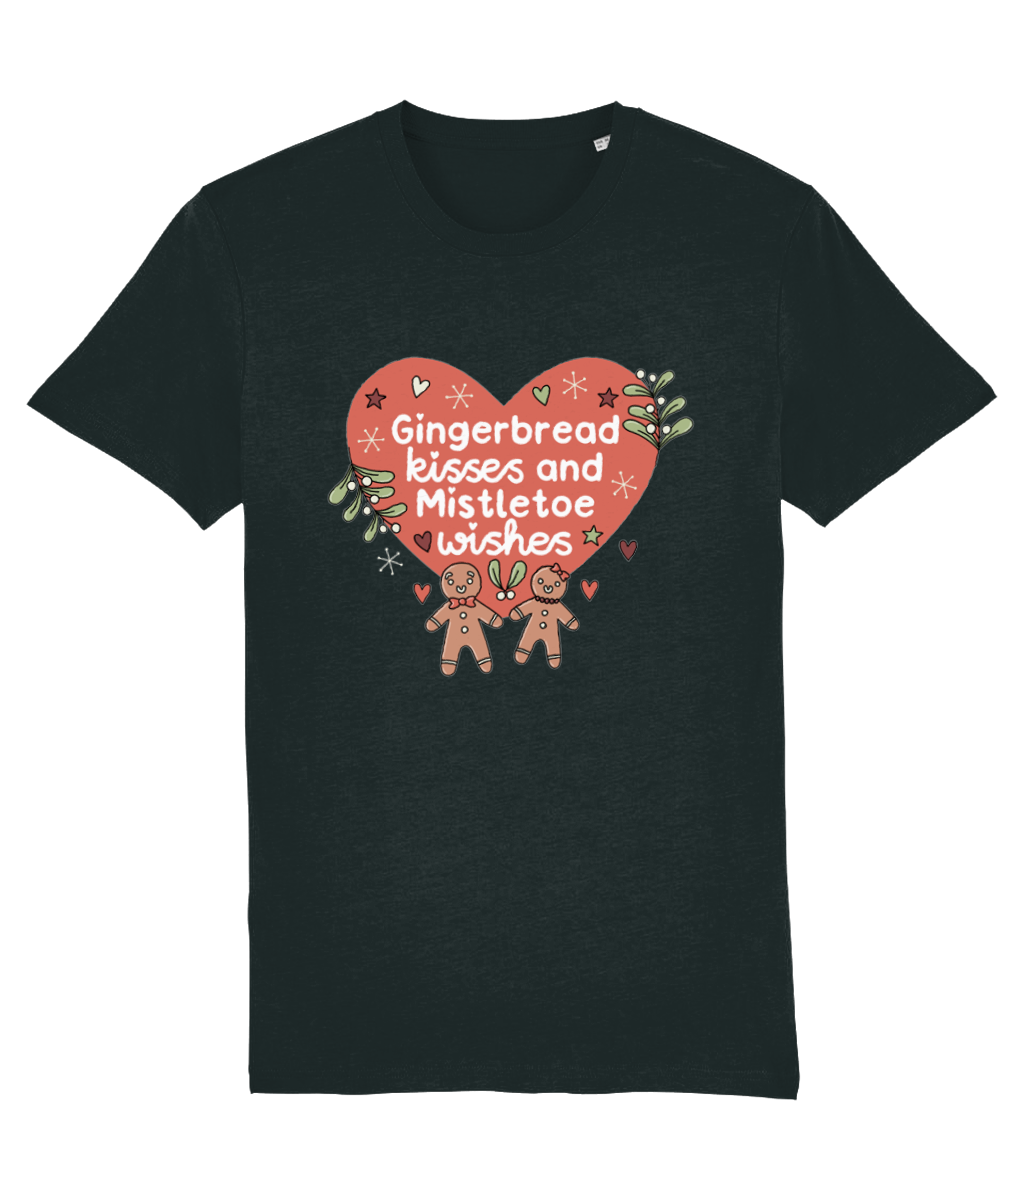 Gingerbread Kisses and Mistletoe Wishes - Adult T-Shirt - Multi Colour Available